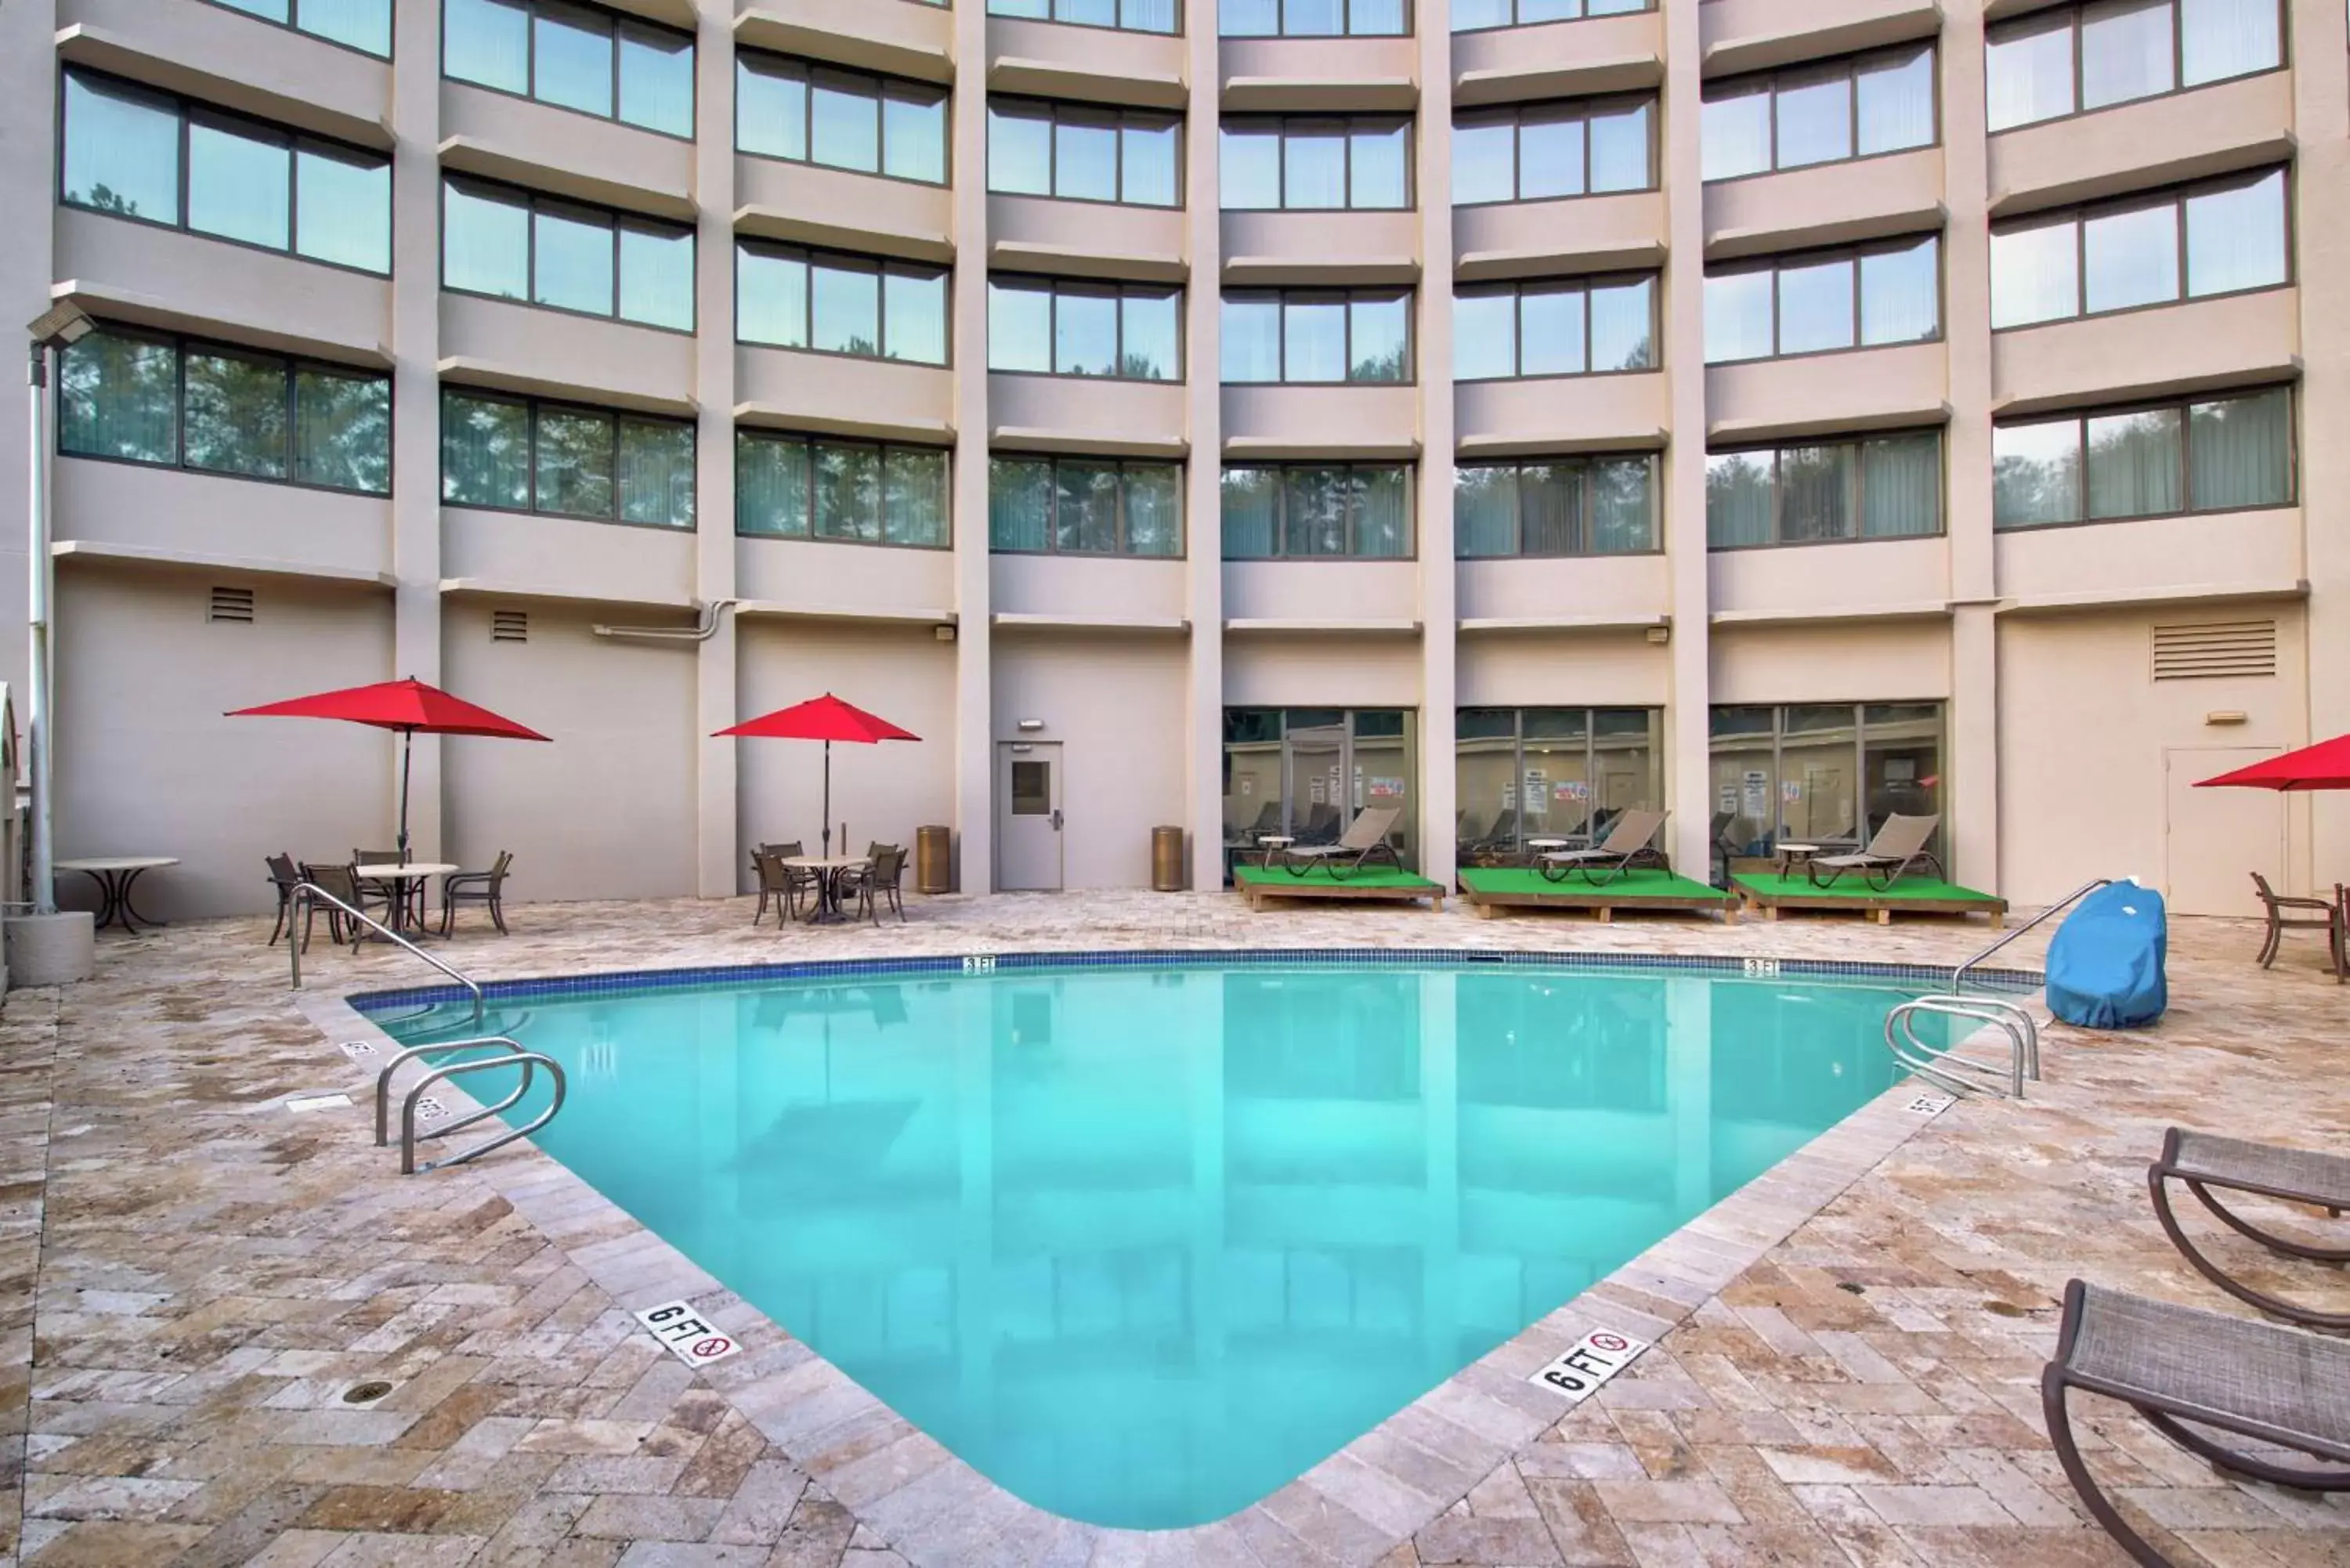 Property building, Swimming Pool in DoubleTree by Hilton Atlanta North Druid Hills/Emory Area